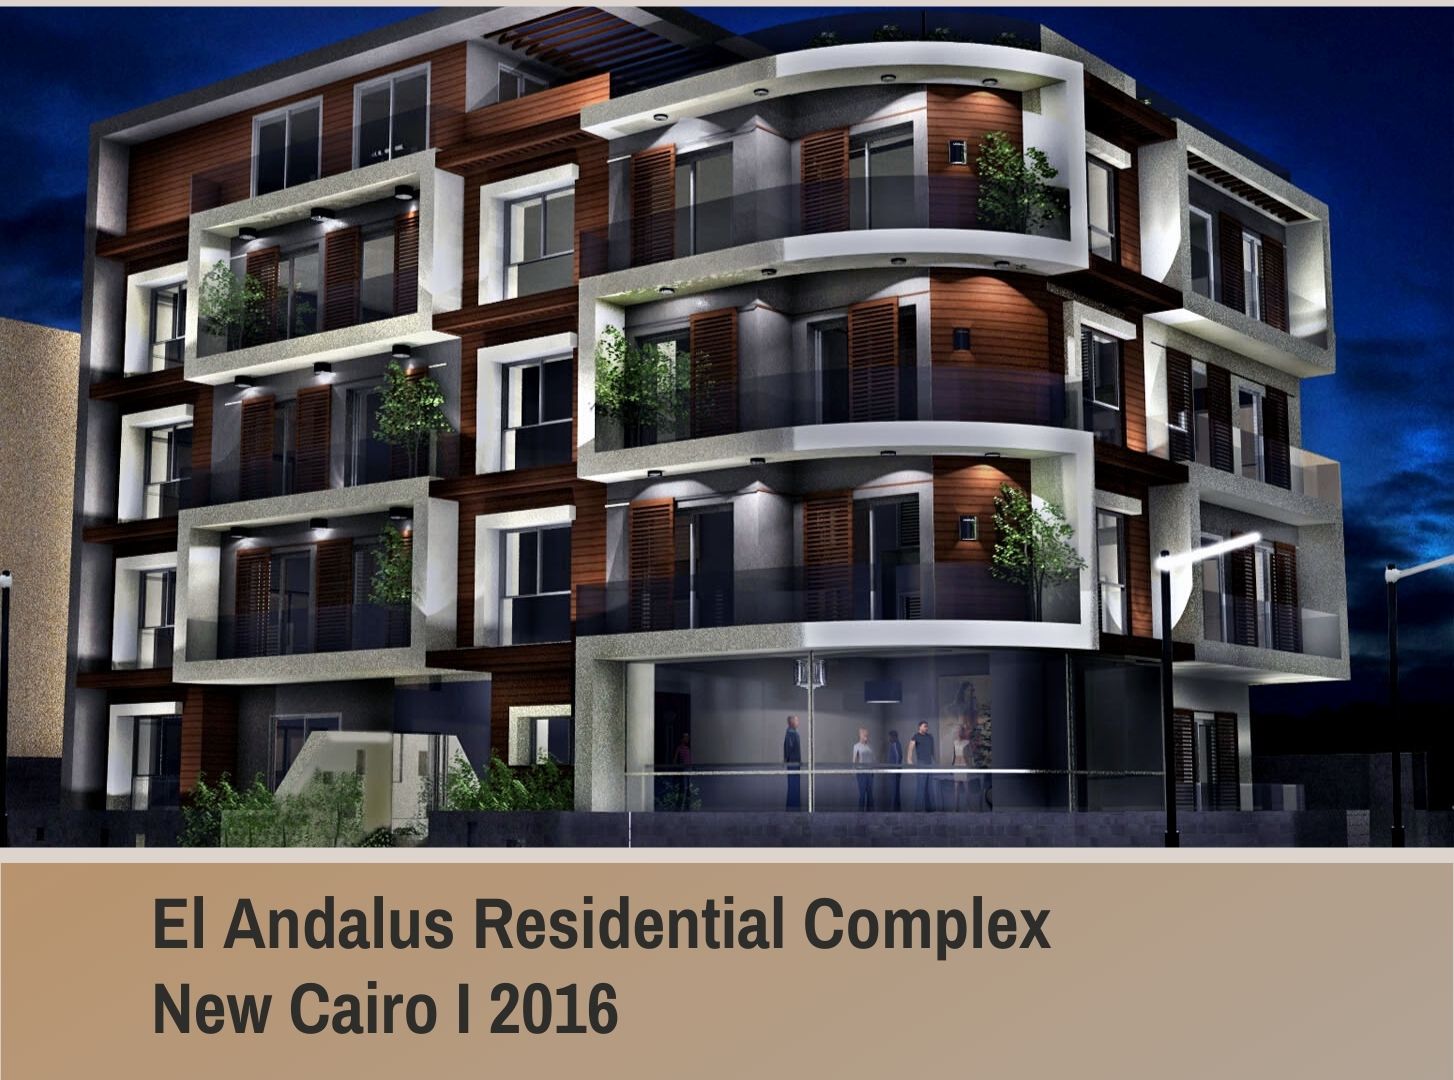 El Andalus Residential Complex